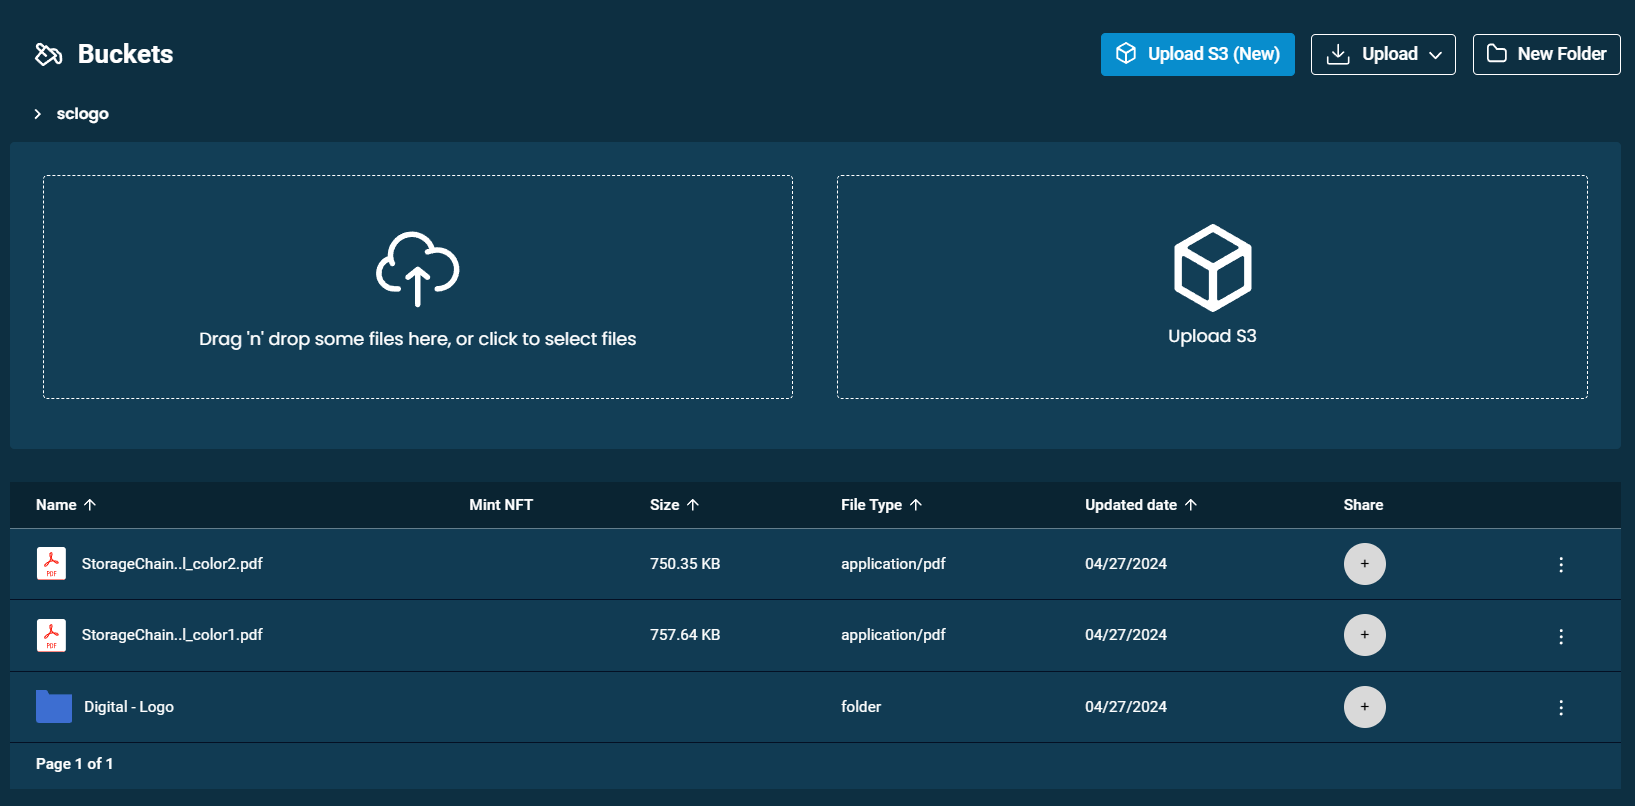 StorageChain offers an operative decentralized cloud with Web2 and Web3 elements blended